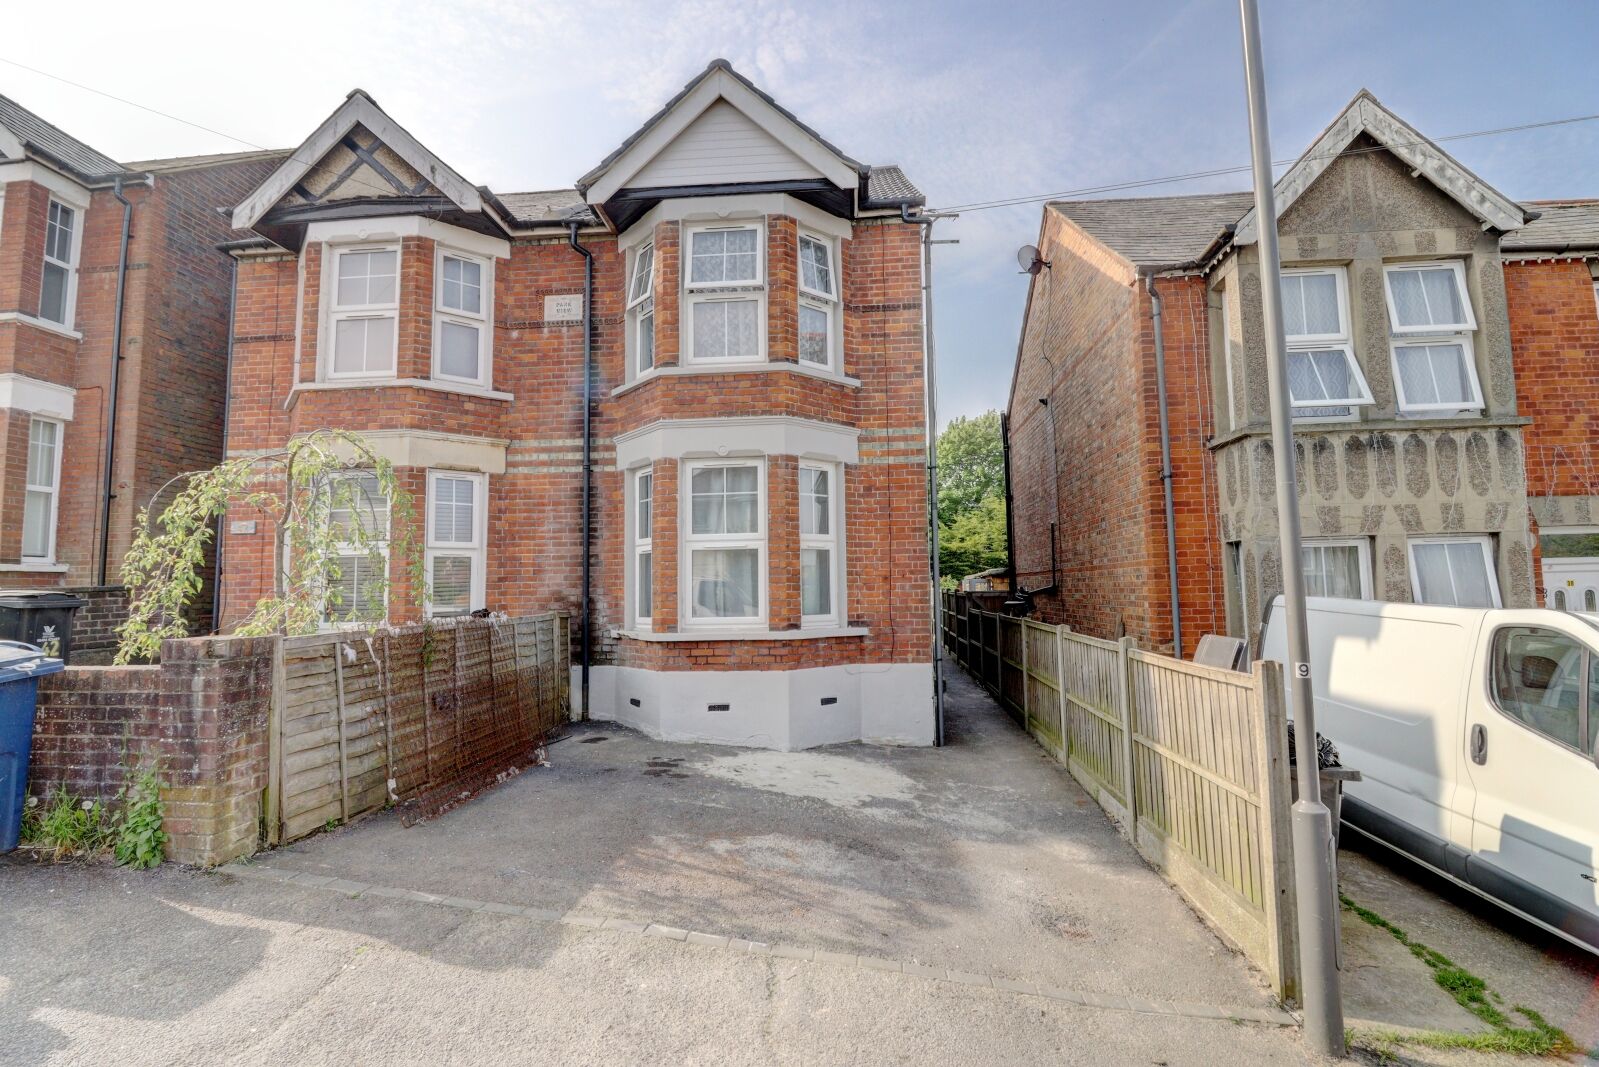 5 bedroom semi detached house for sale Benjamin Road, High Wycombe, HP13, main image